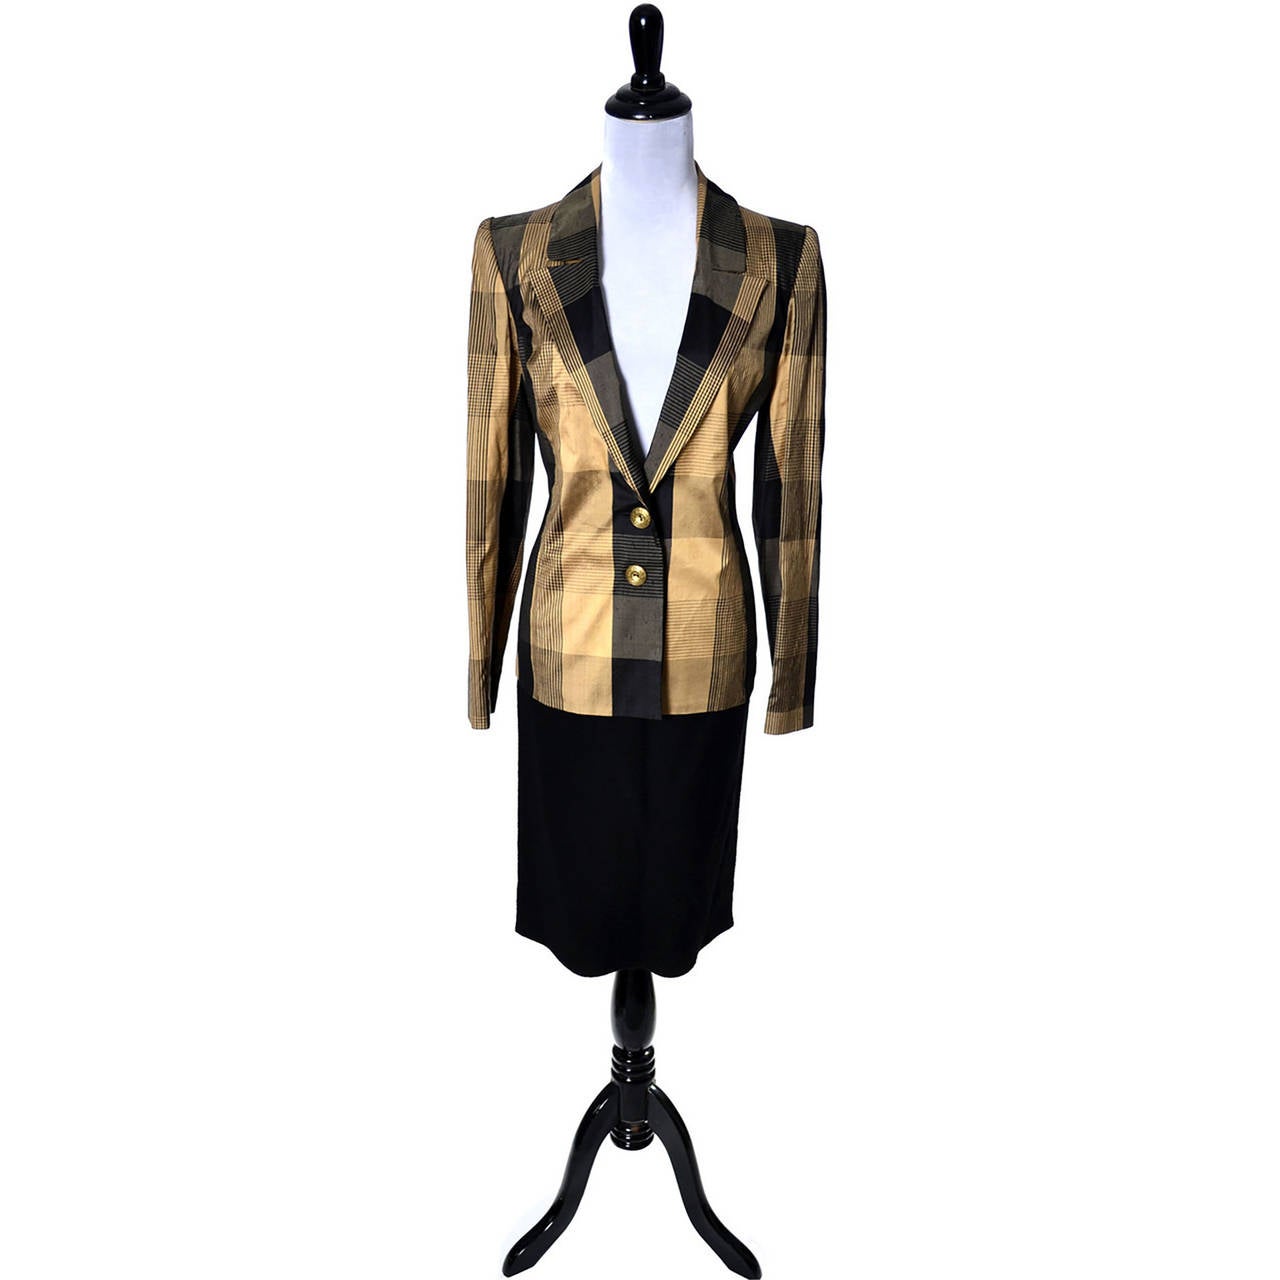 This vintage Valentino Boutique Collectible skirt suit ensemble comes with 2 blazer options. This includes a vintage Valentino black boucle wool skirt and both a black boucle wool blazer and a coordinating black and gold plaid silk blazer. You can